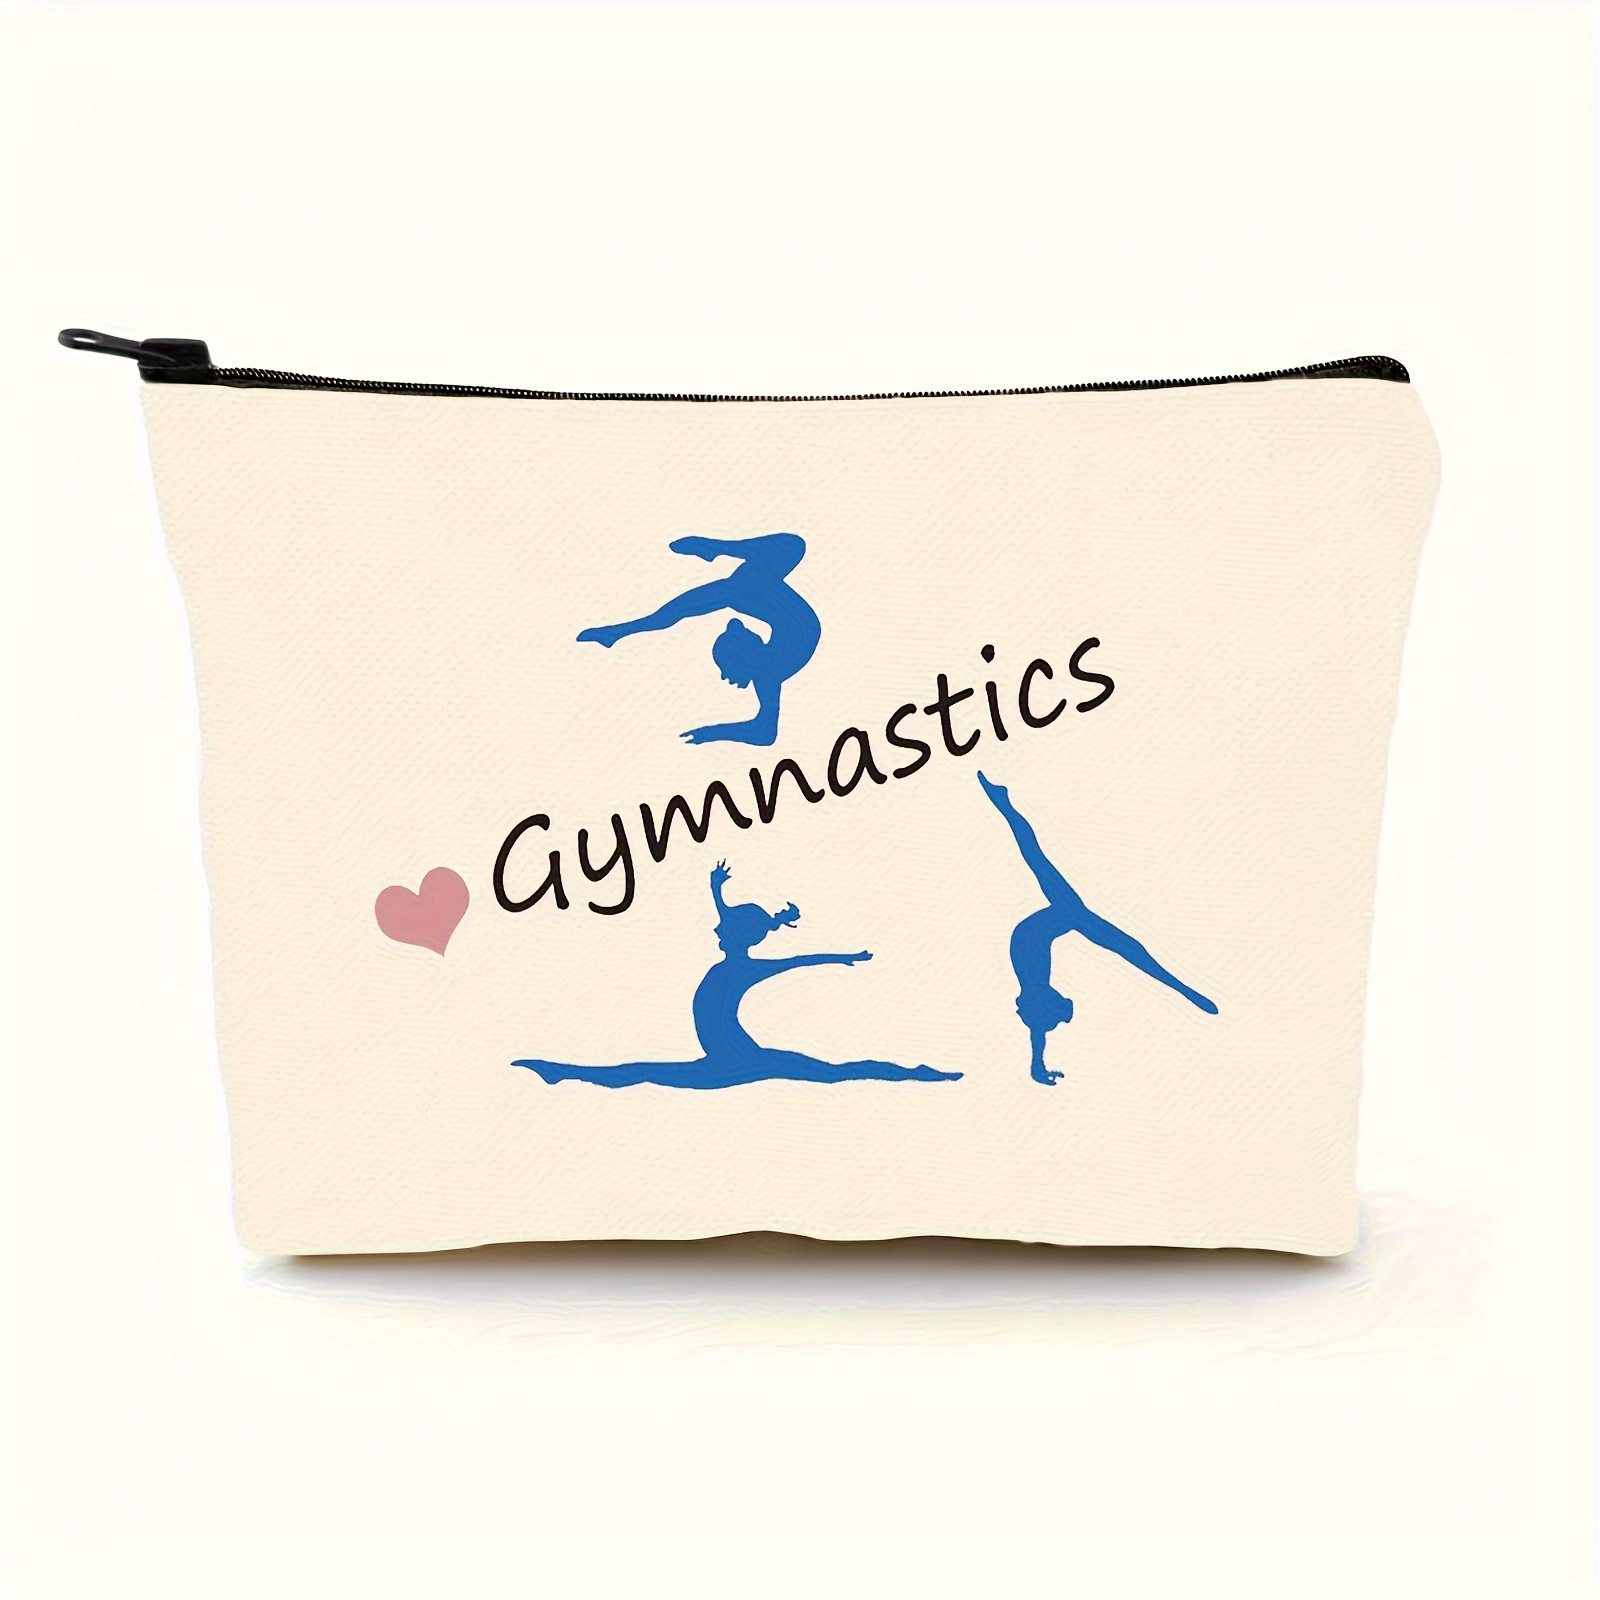 

1pc Gymnastics Makeup Bag, Gifts For Women Friend Cosmetic Pouch, Gymnasts Gifts For Girl, Gymnastics Travel Bag Purse Beauty Kit, Toiletry Makeup Zipper Pouch